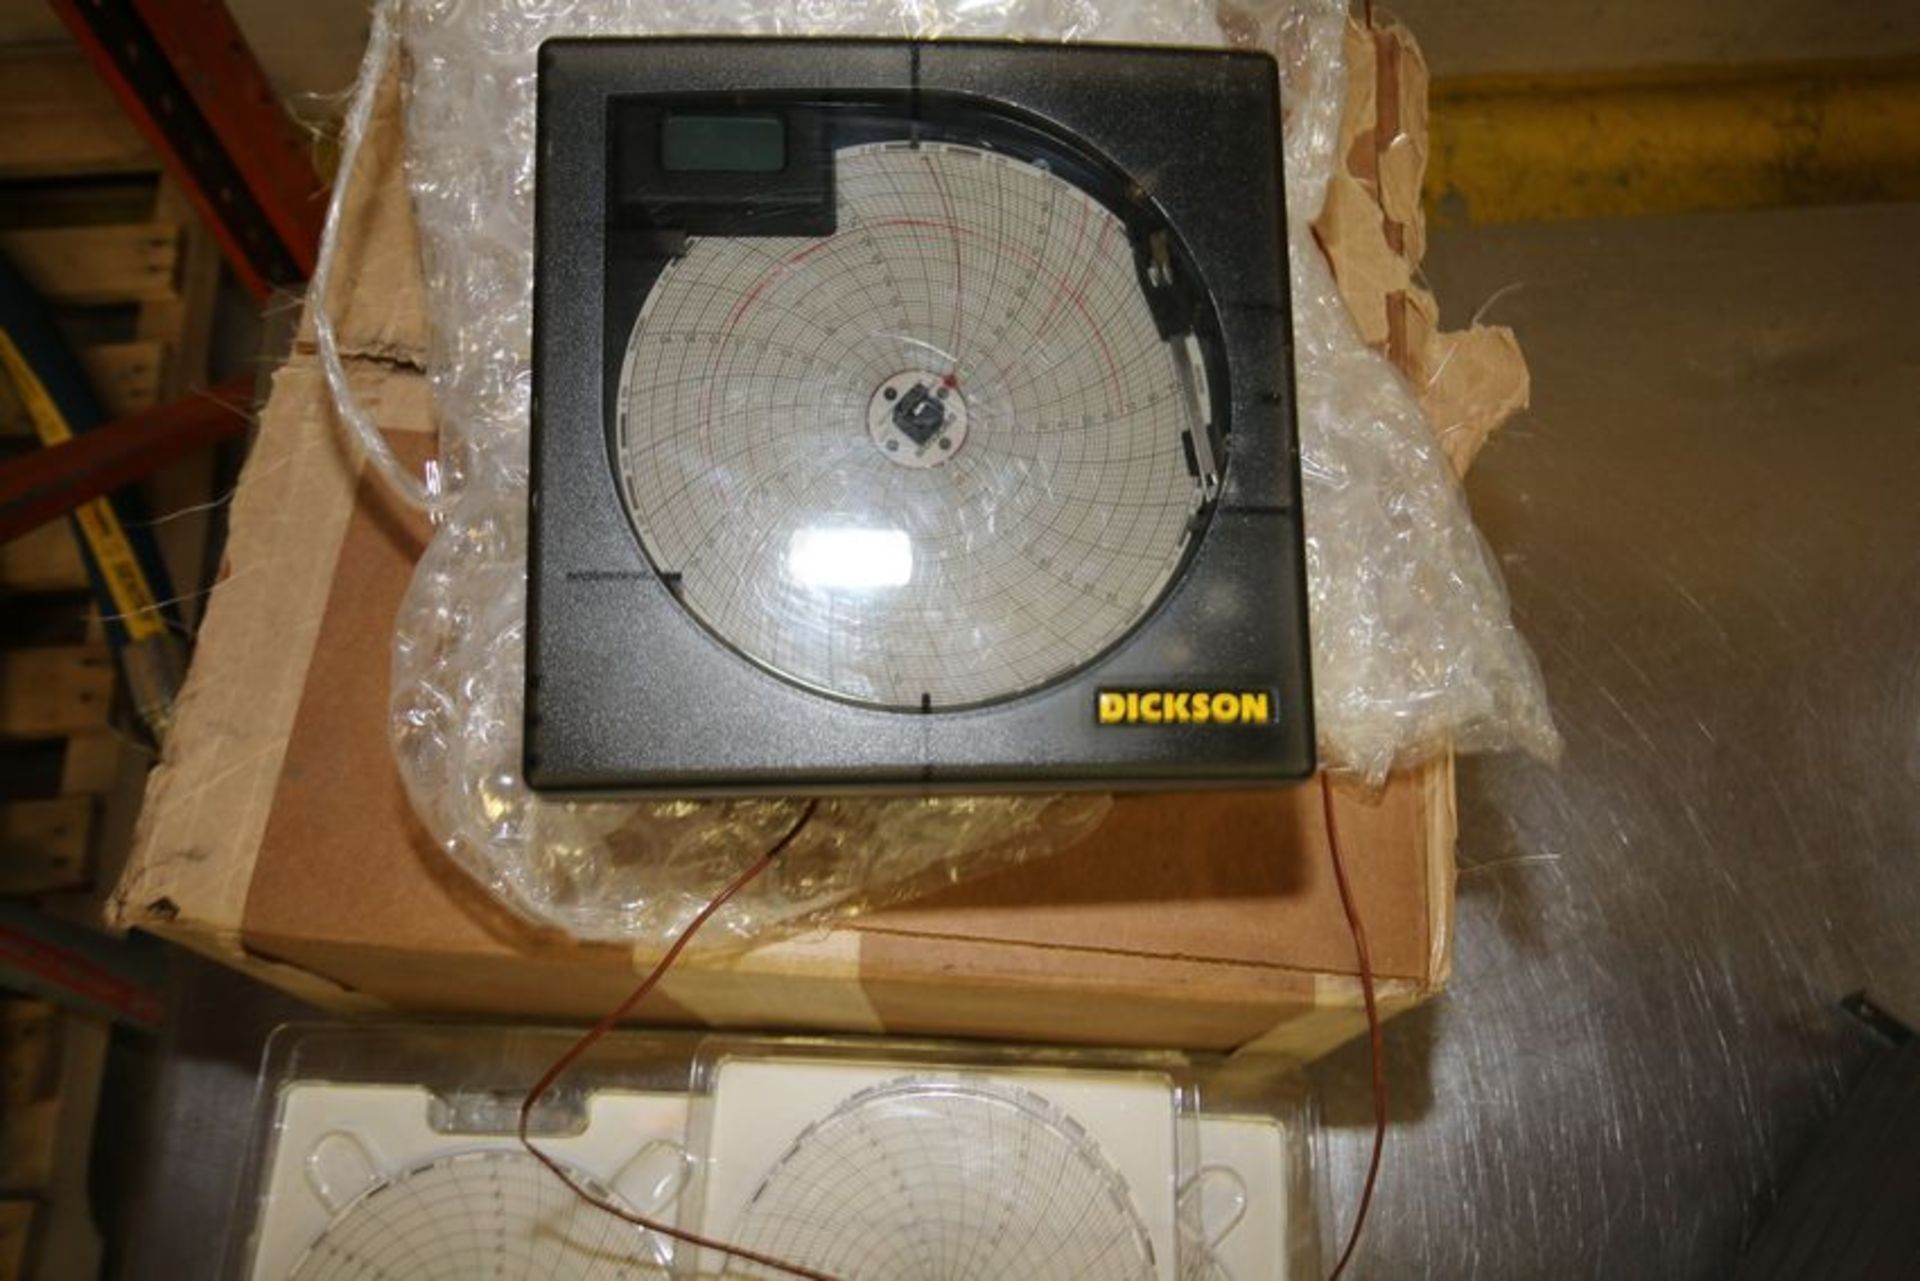 NEW Dickson Chart Recorder, S/N 09133262Includes NEW Dickson Charts - Image 2 of 3